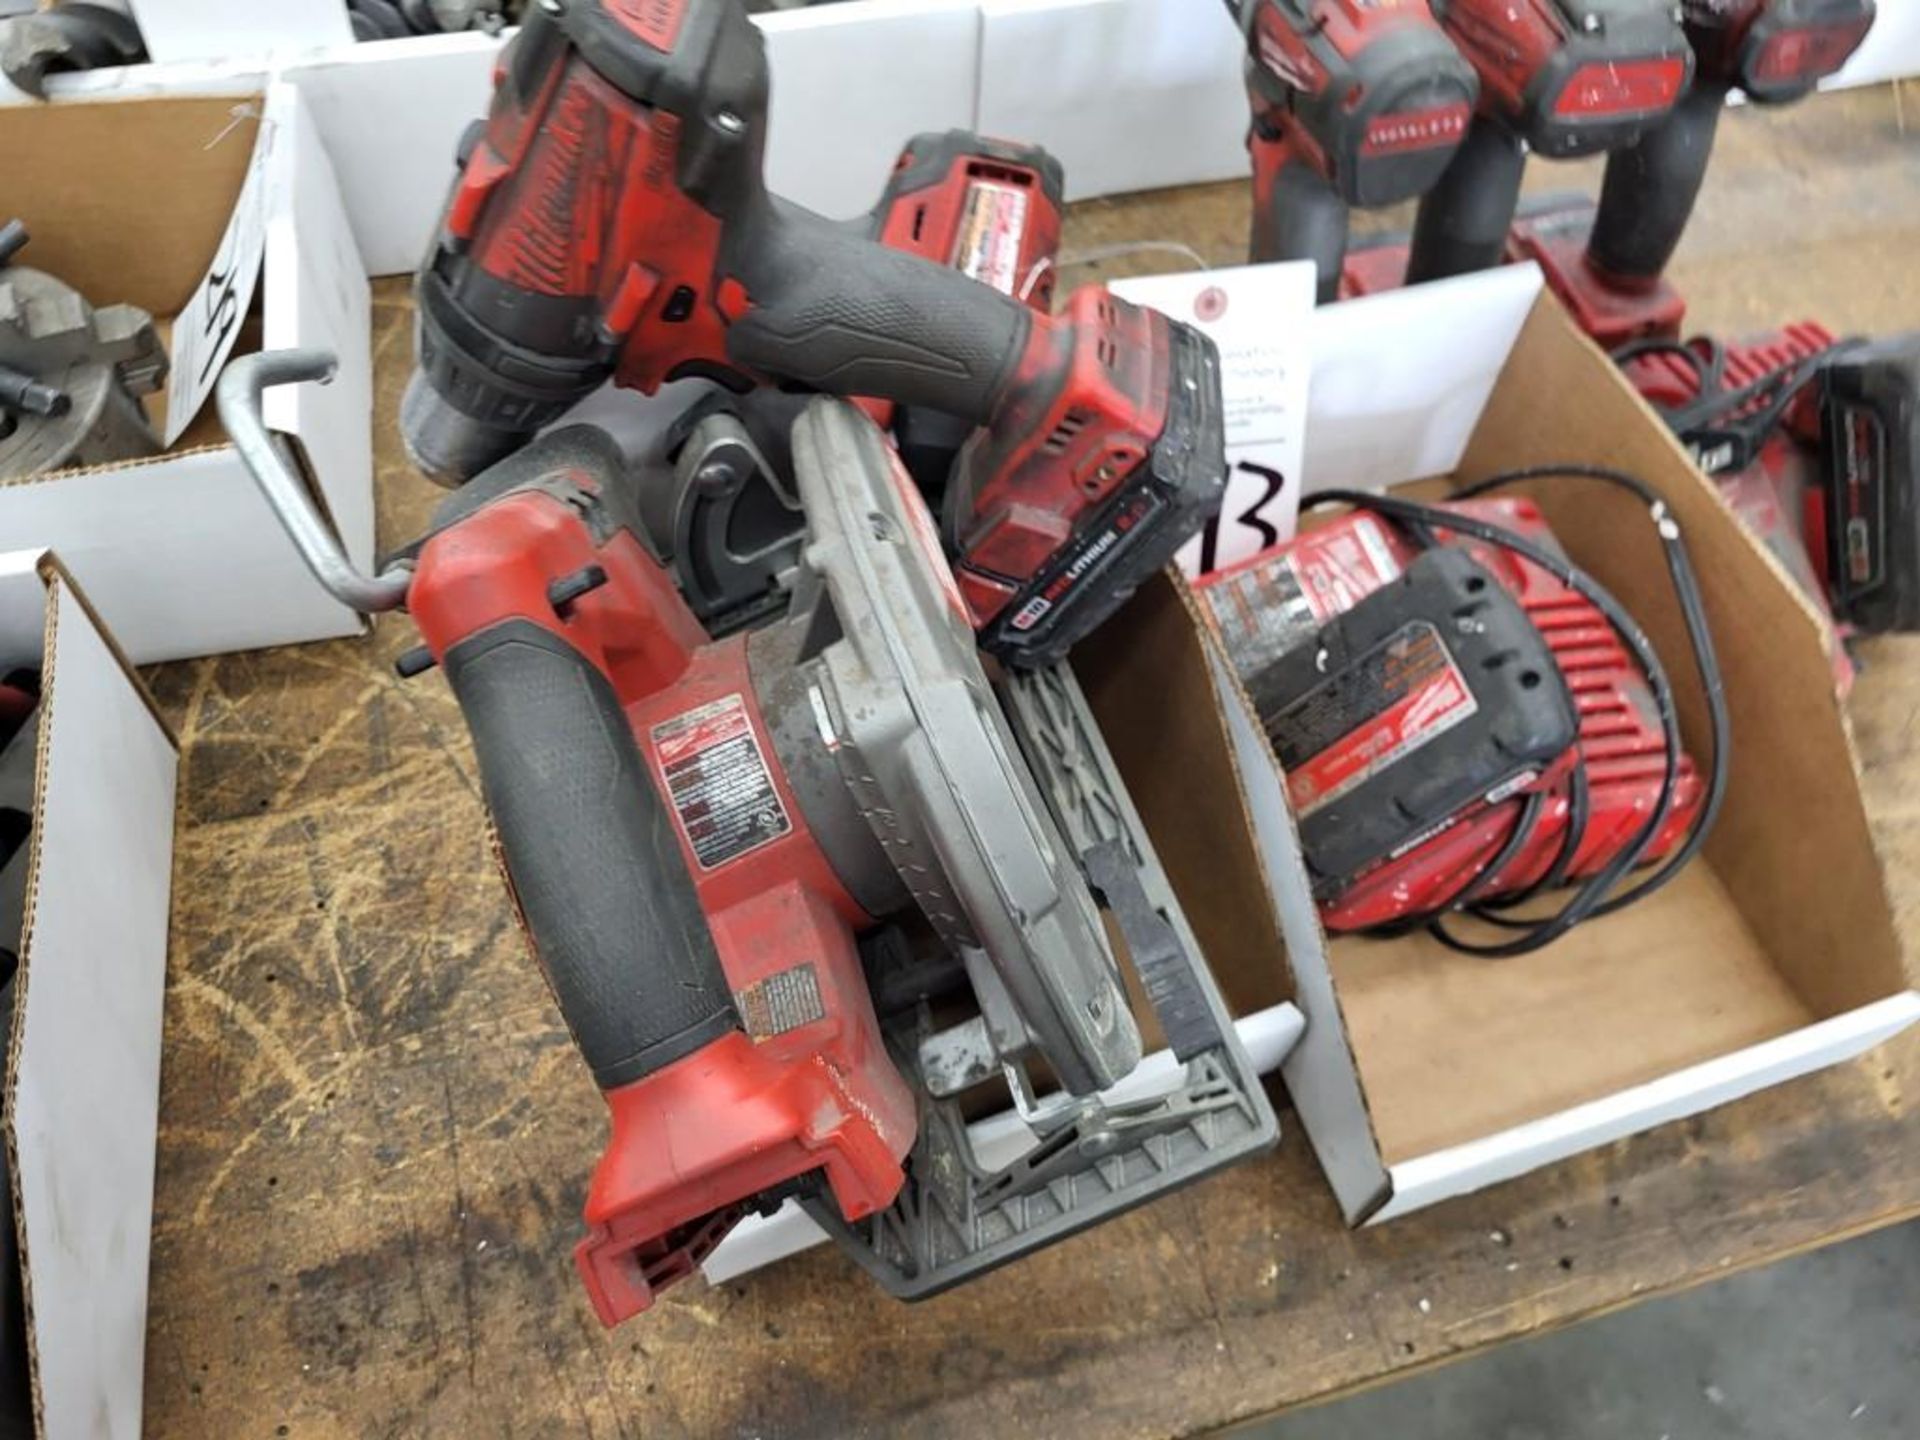 LOT OF MILWAUKEE CORDLIES DRILL DRIVERS, CIRCULAR SAW, CHARGERS, BATTERIES - Image 2 of 6